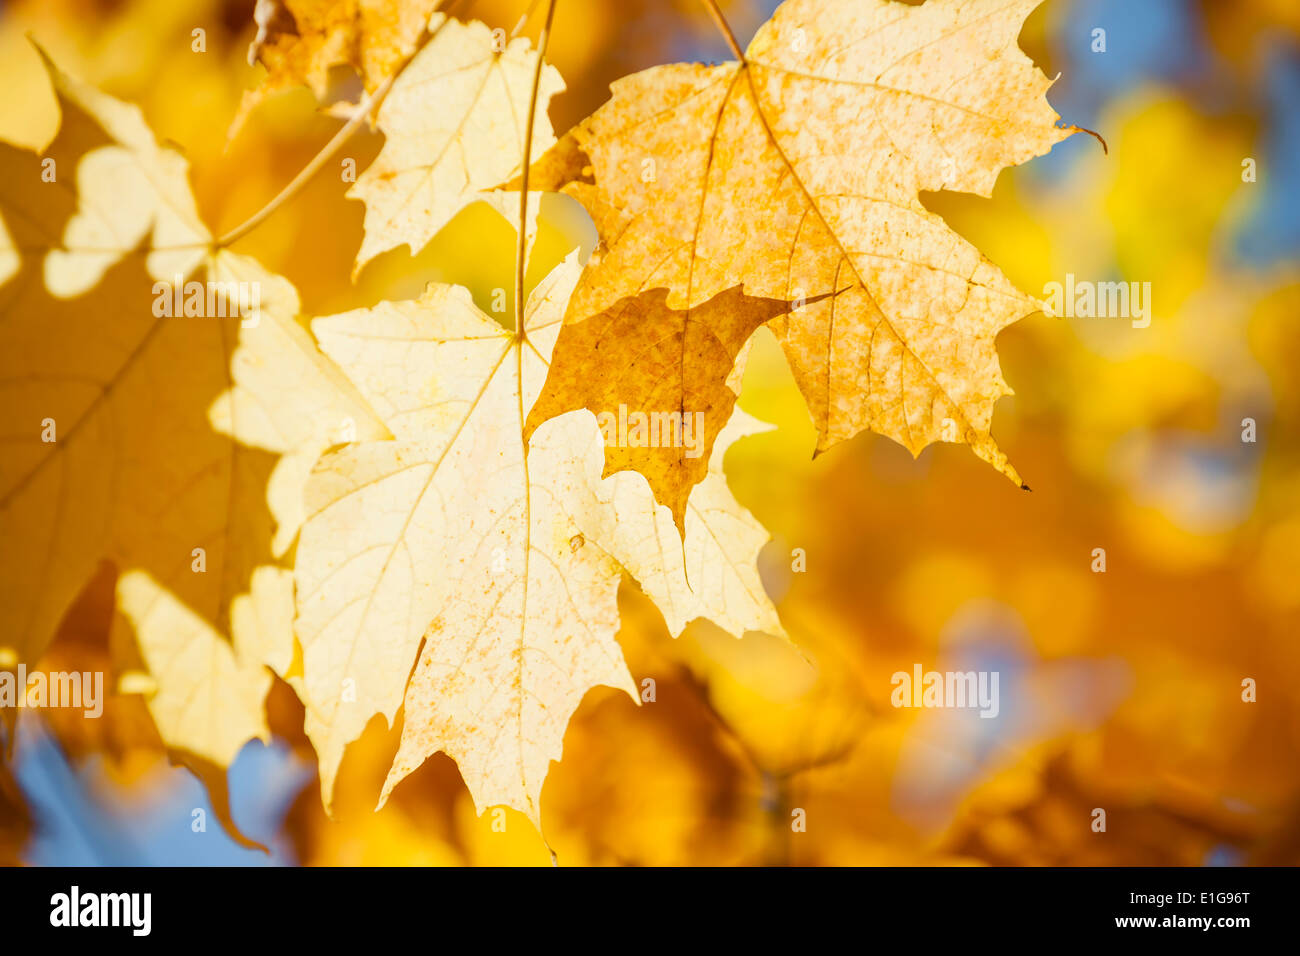 Orange and yellow backlit fall maple leaves glowing in autumn sunshine with copy space Stock Photo